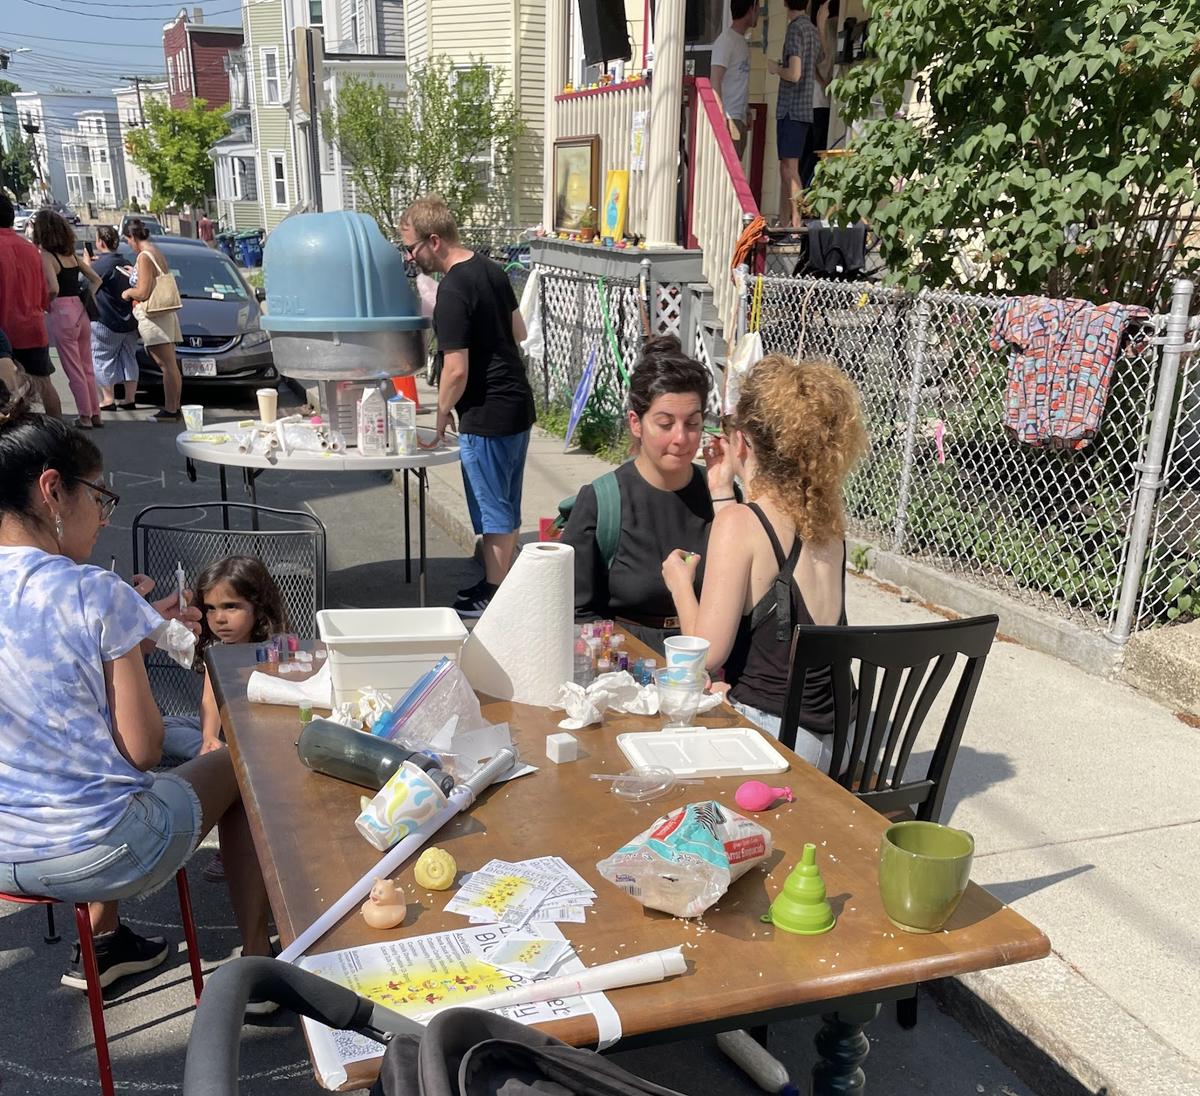 A photo of people face painting sitting at a table on the street during a Block Party